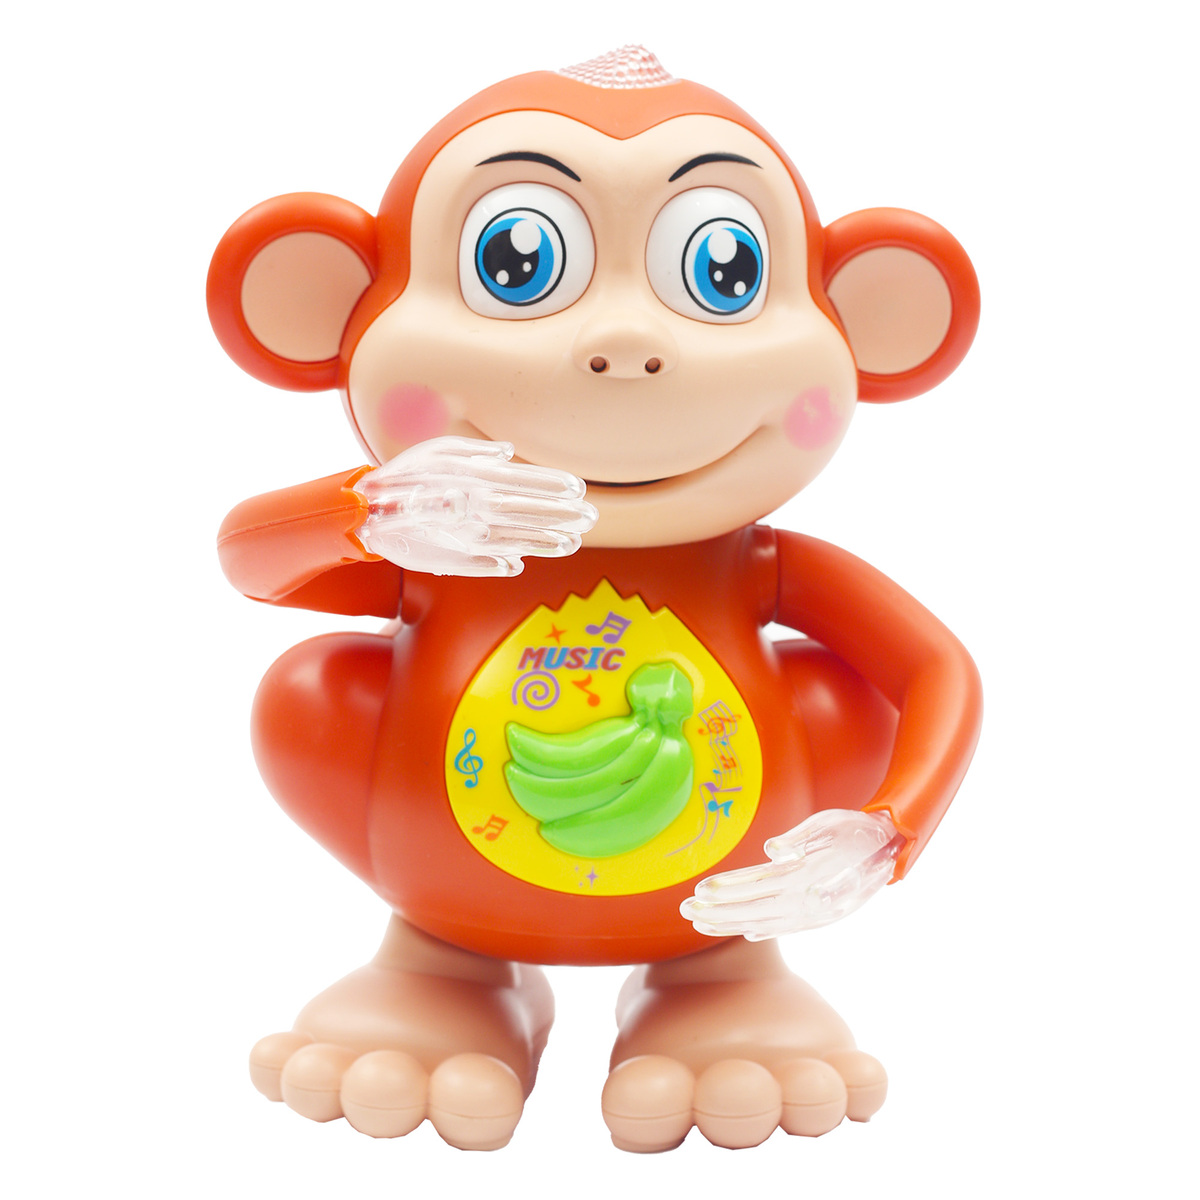 Skid Fusion Battery Operated Dancing Monkey YJ-3030